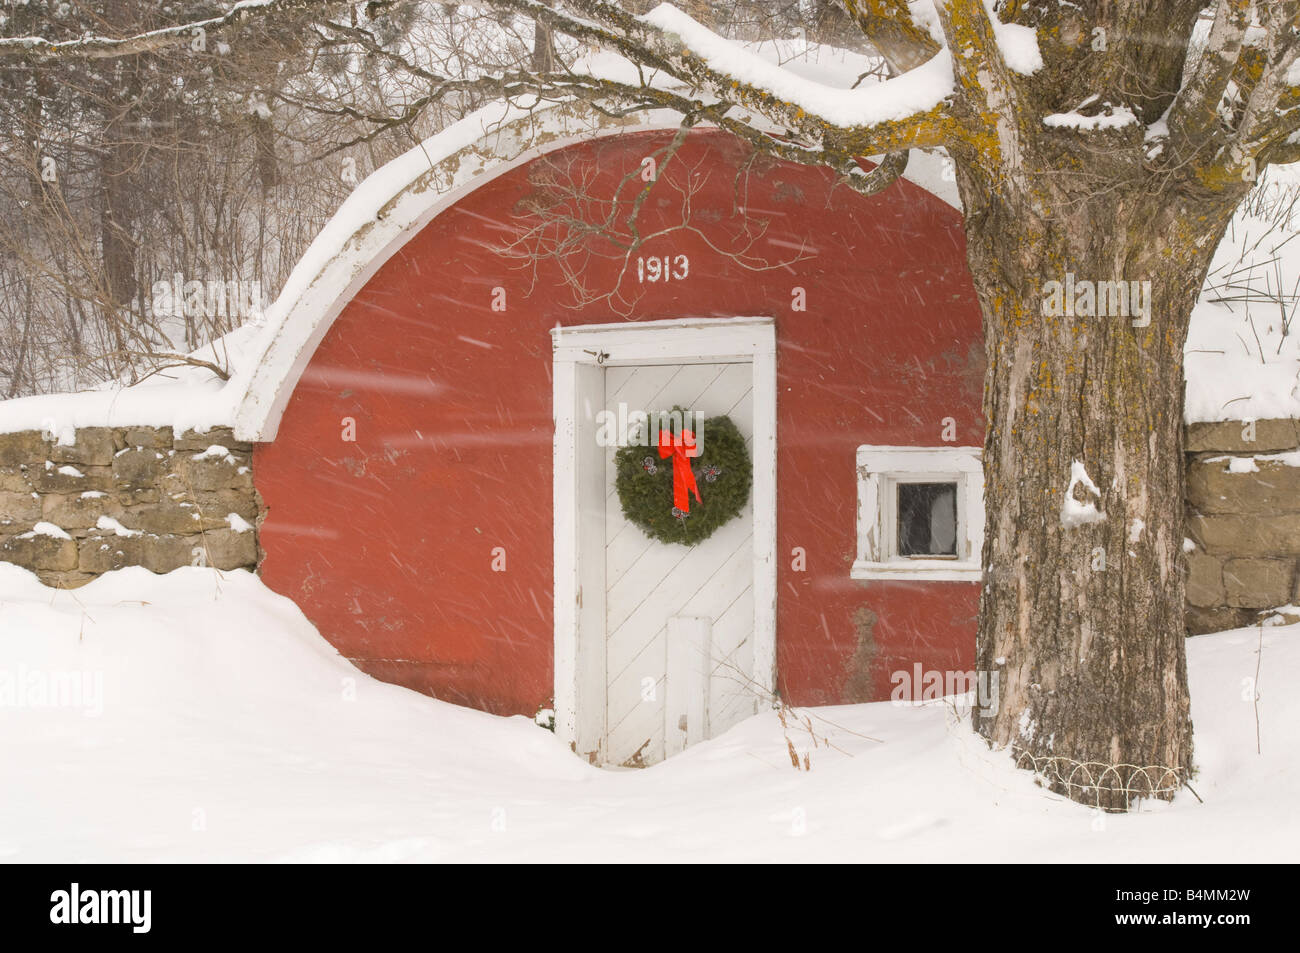 An old red root cellar with a Christmas wreath during a snowstorm Stock Photo